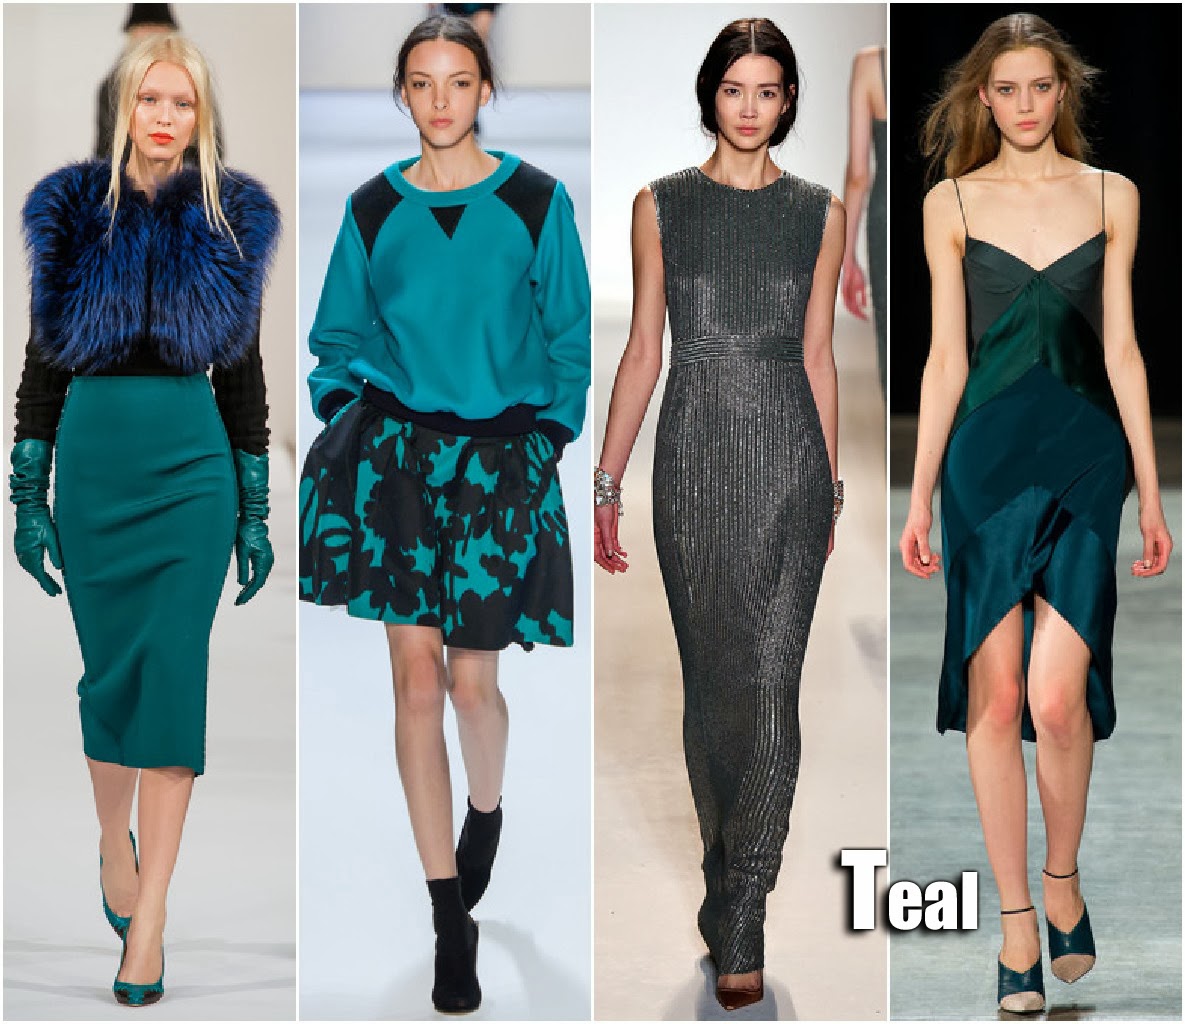 Fall 2013 trends